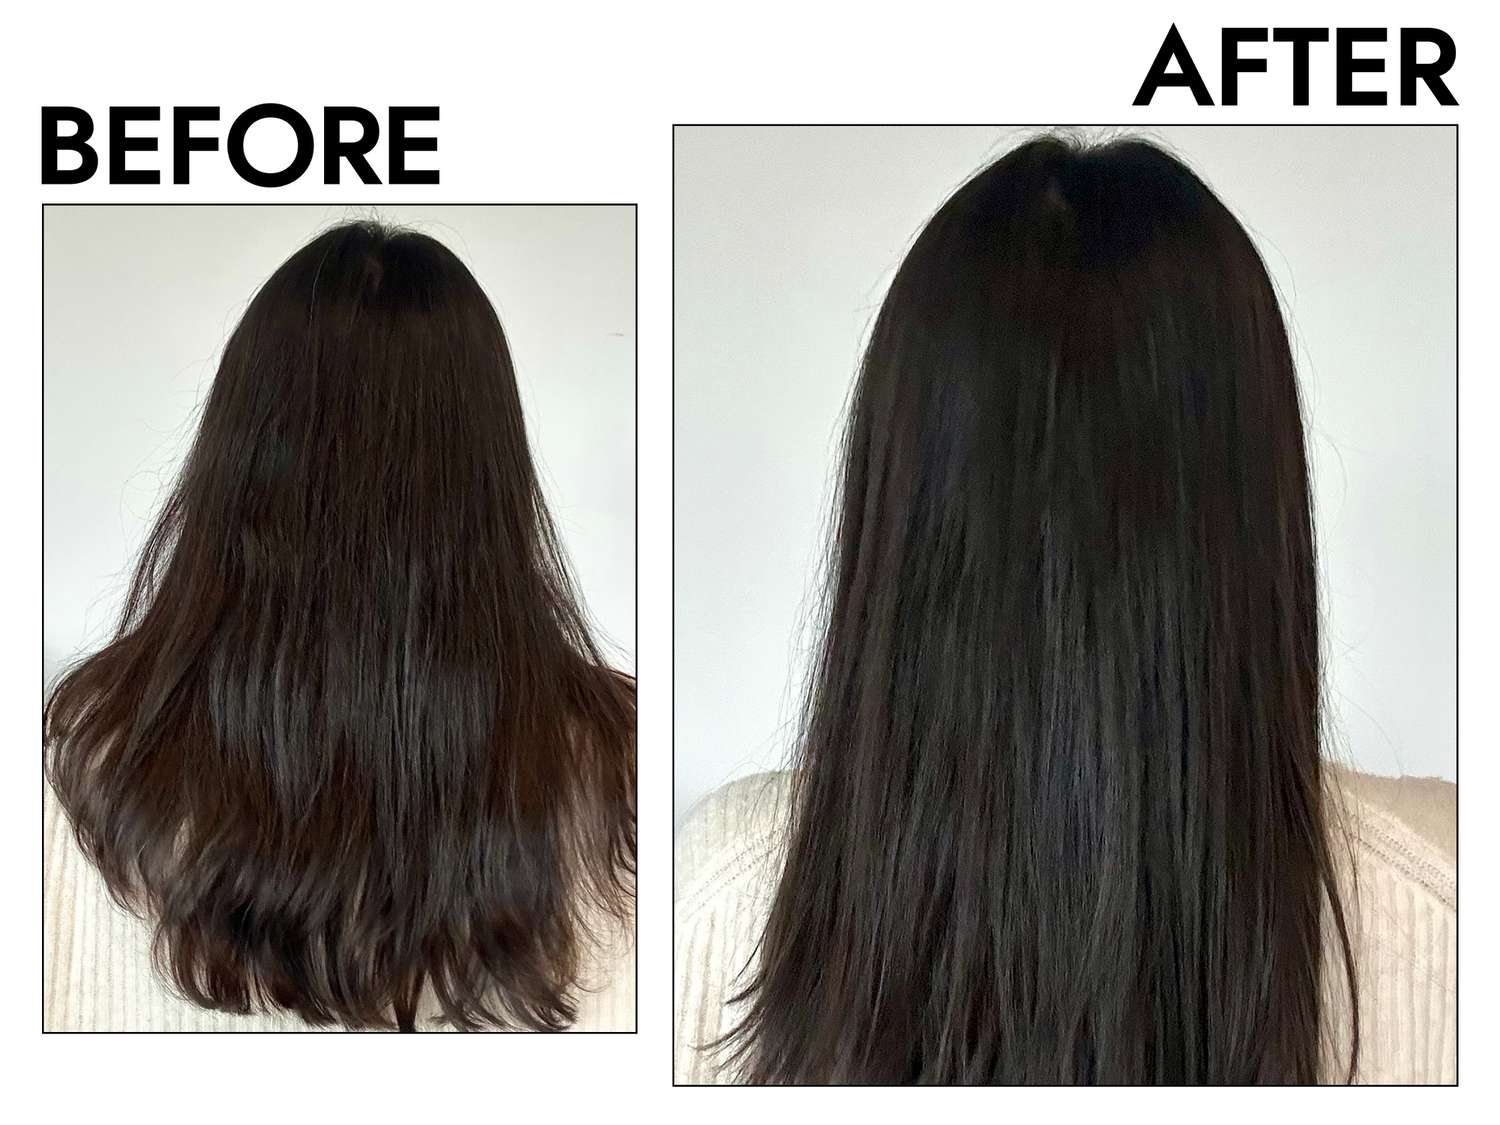 A person before and after using the Moroccanoil Protect & Prevent Spray